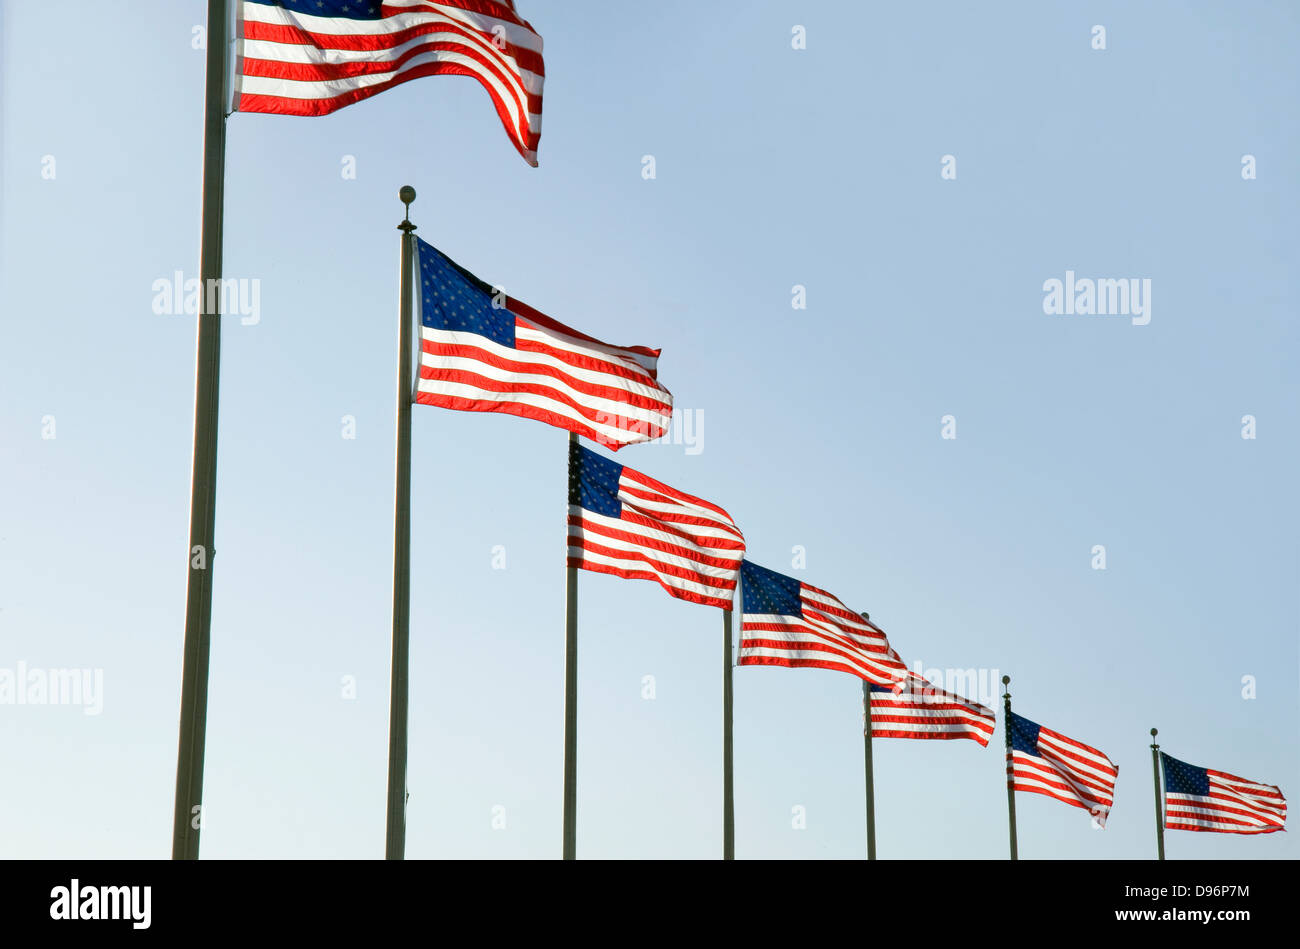 United States flags flap in the breeze Stock Photo